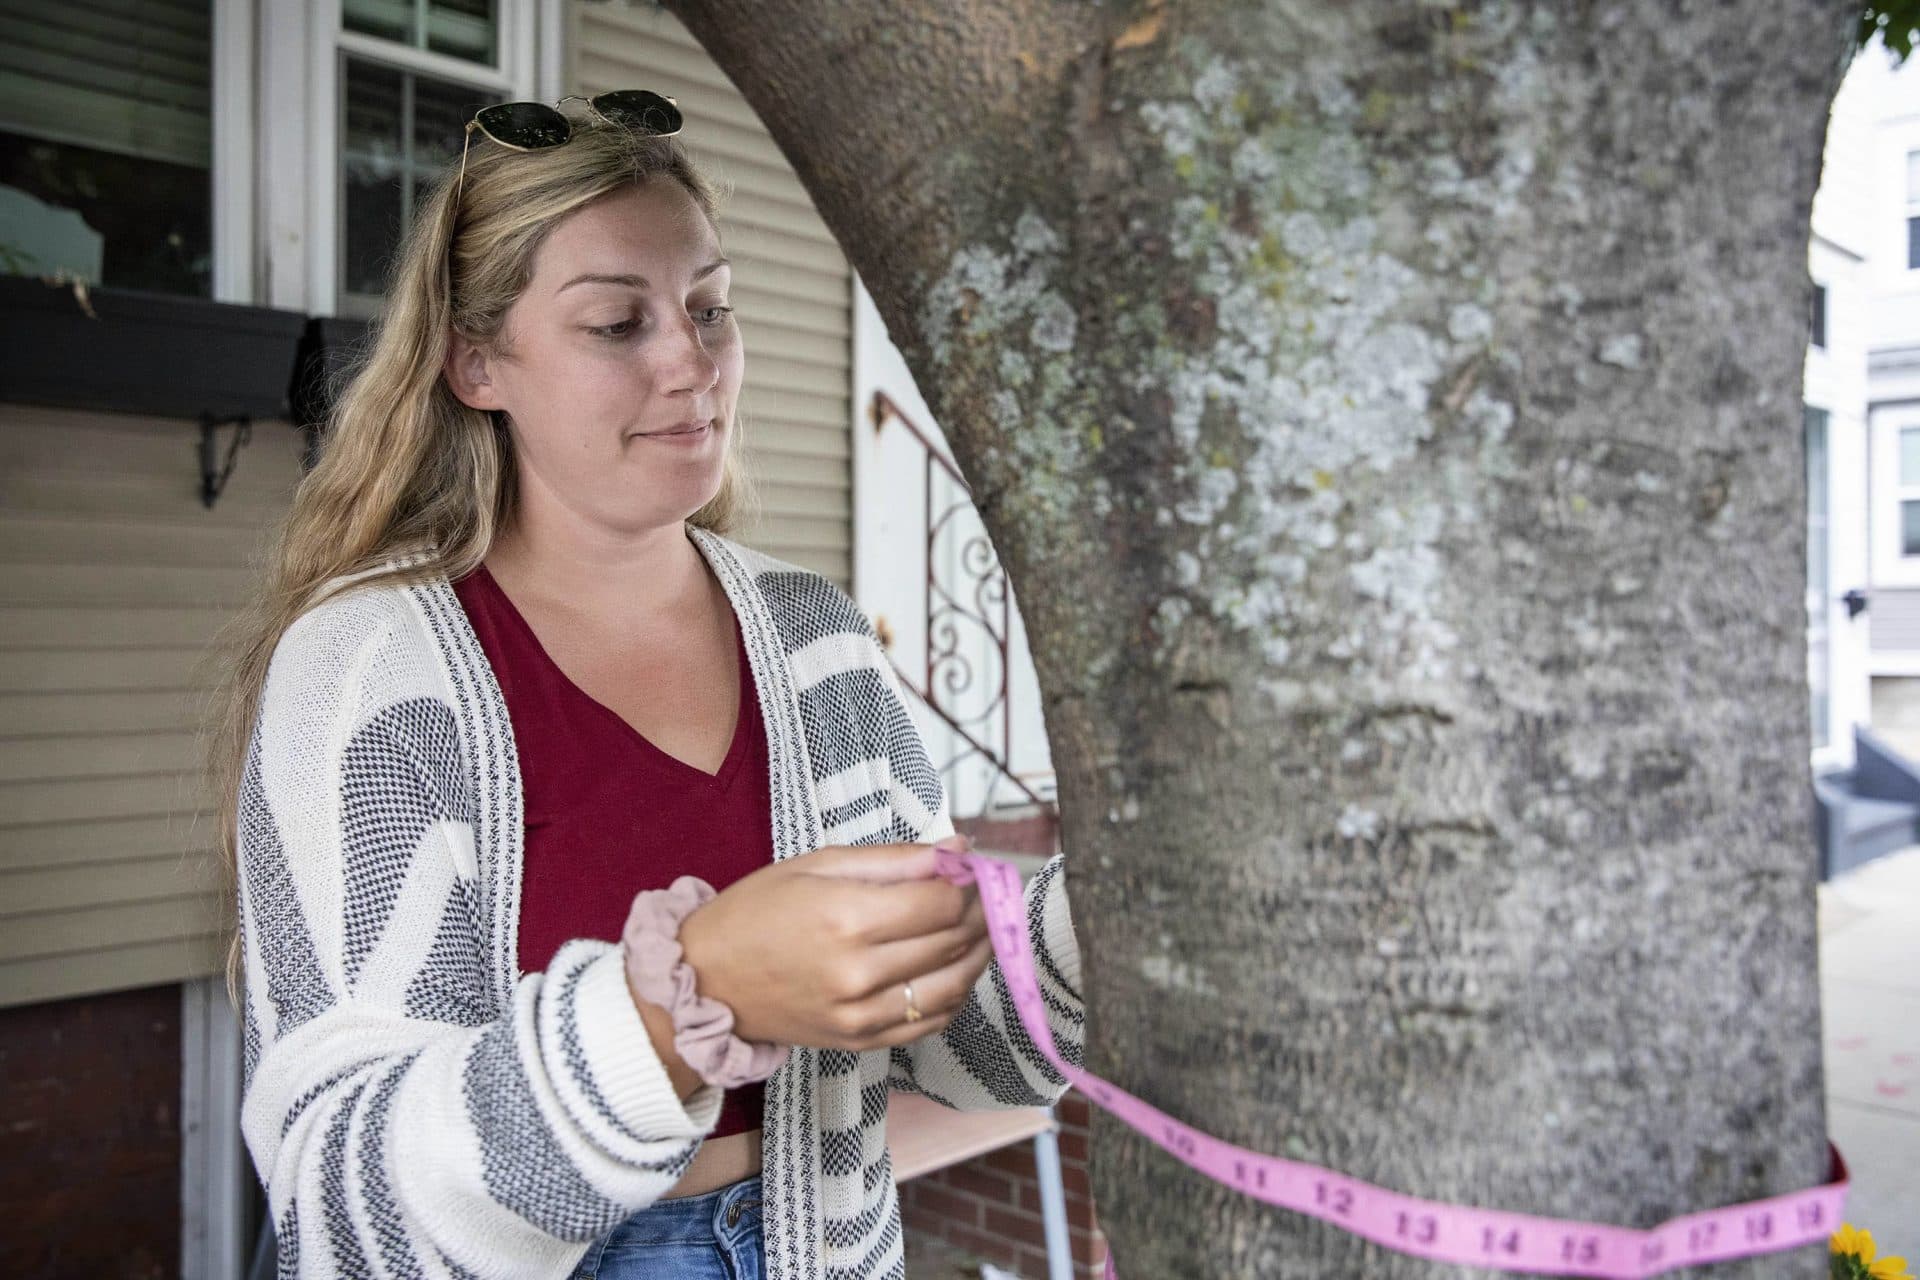 Caitlyn Murphy measures her tree's circumference to use an online tool to calculate its environmental benefits. (Robin Lubbock/WBUR)